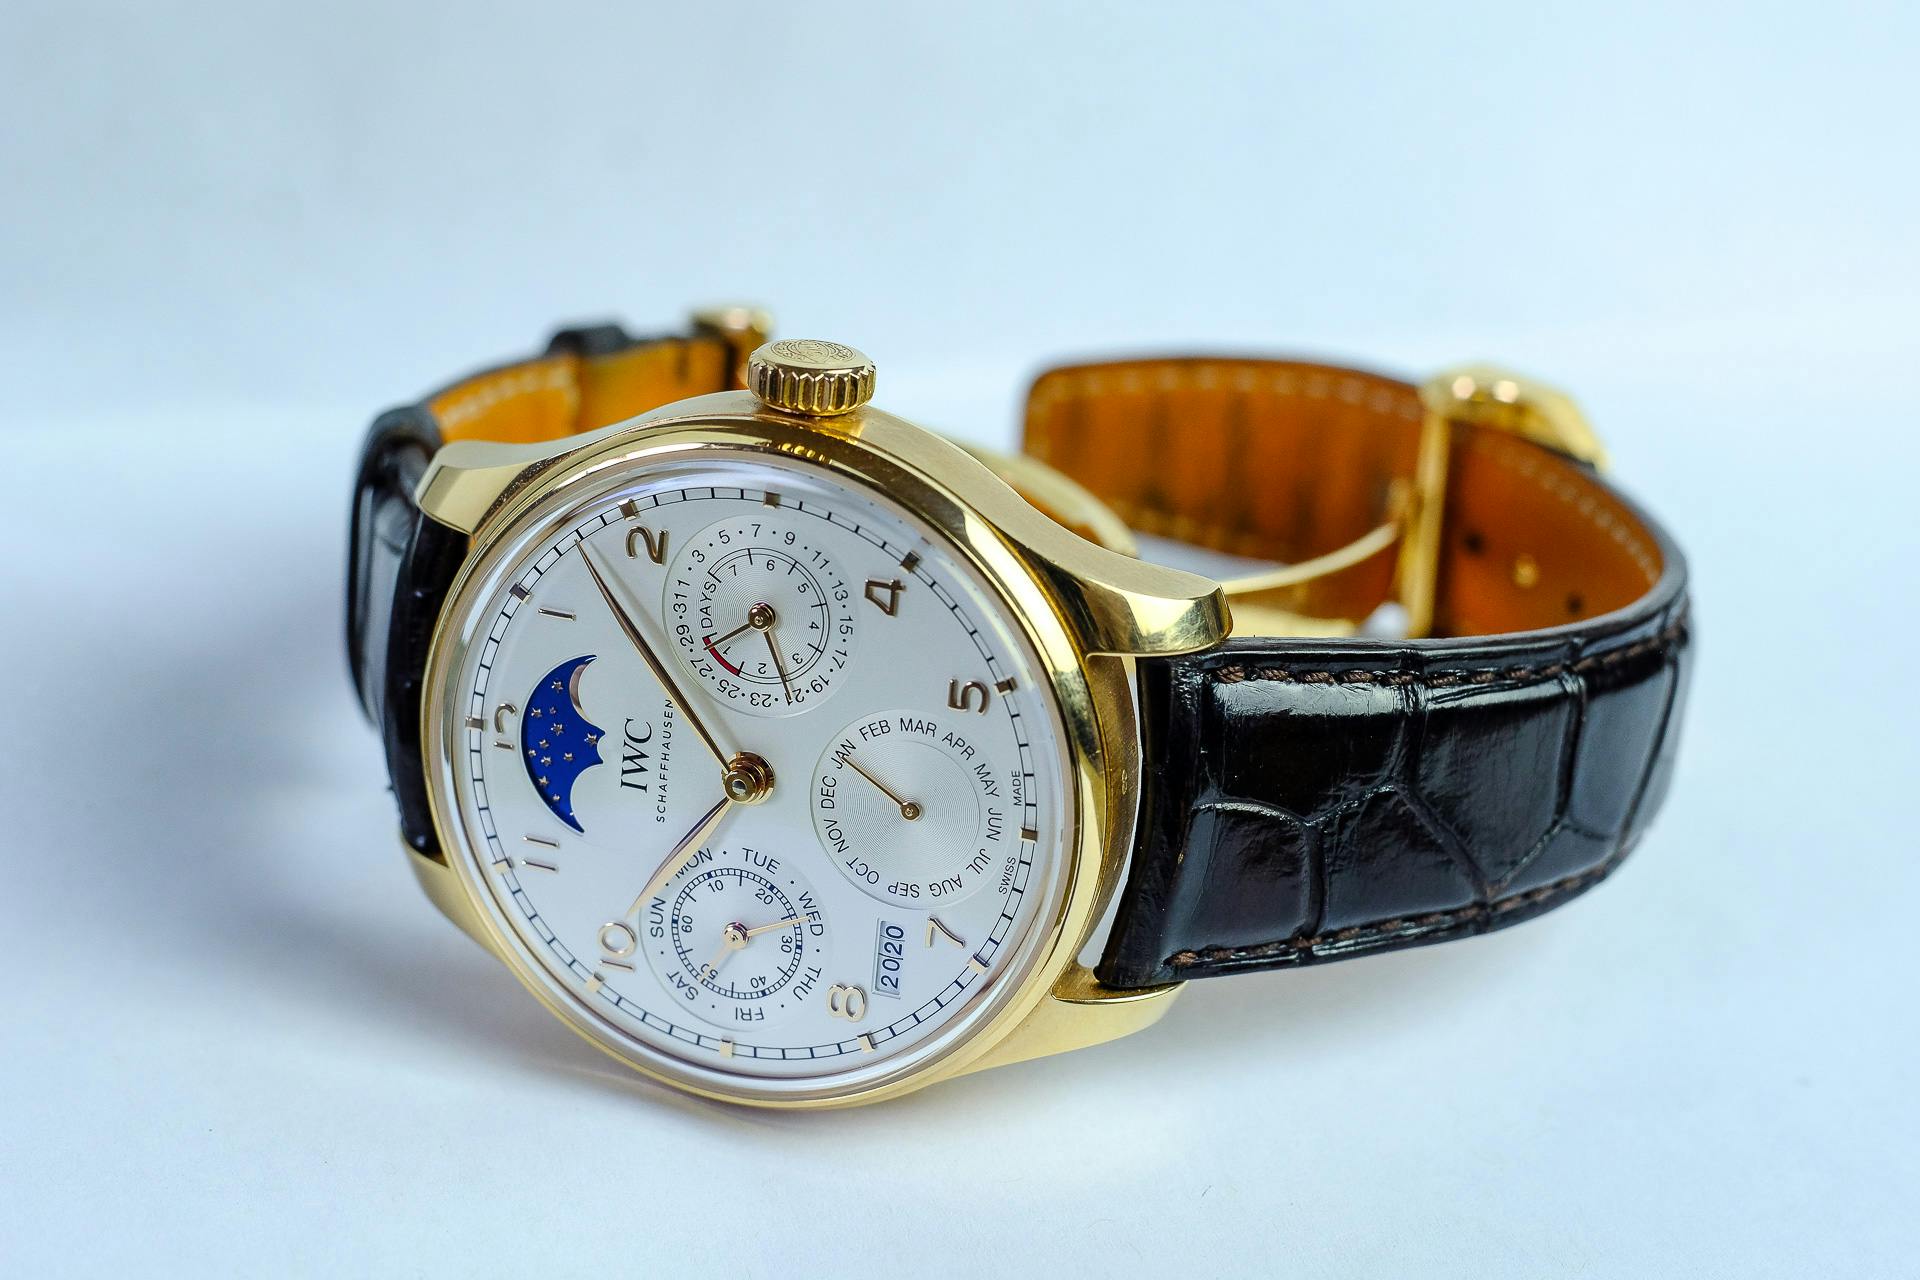 2017 IWC PORTUGIESER PERPETUAL CALENDAR for sale by auction in Stroud ...